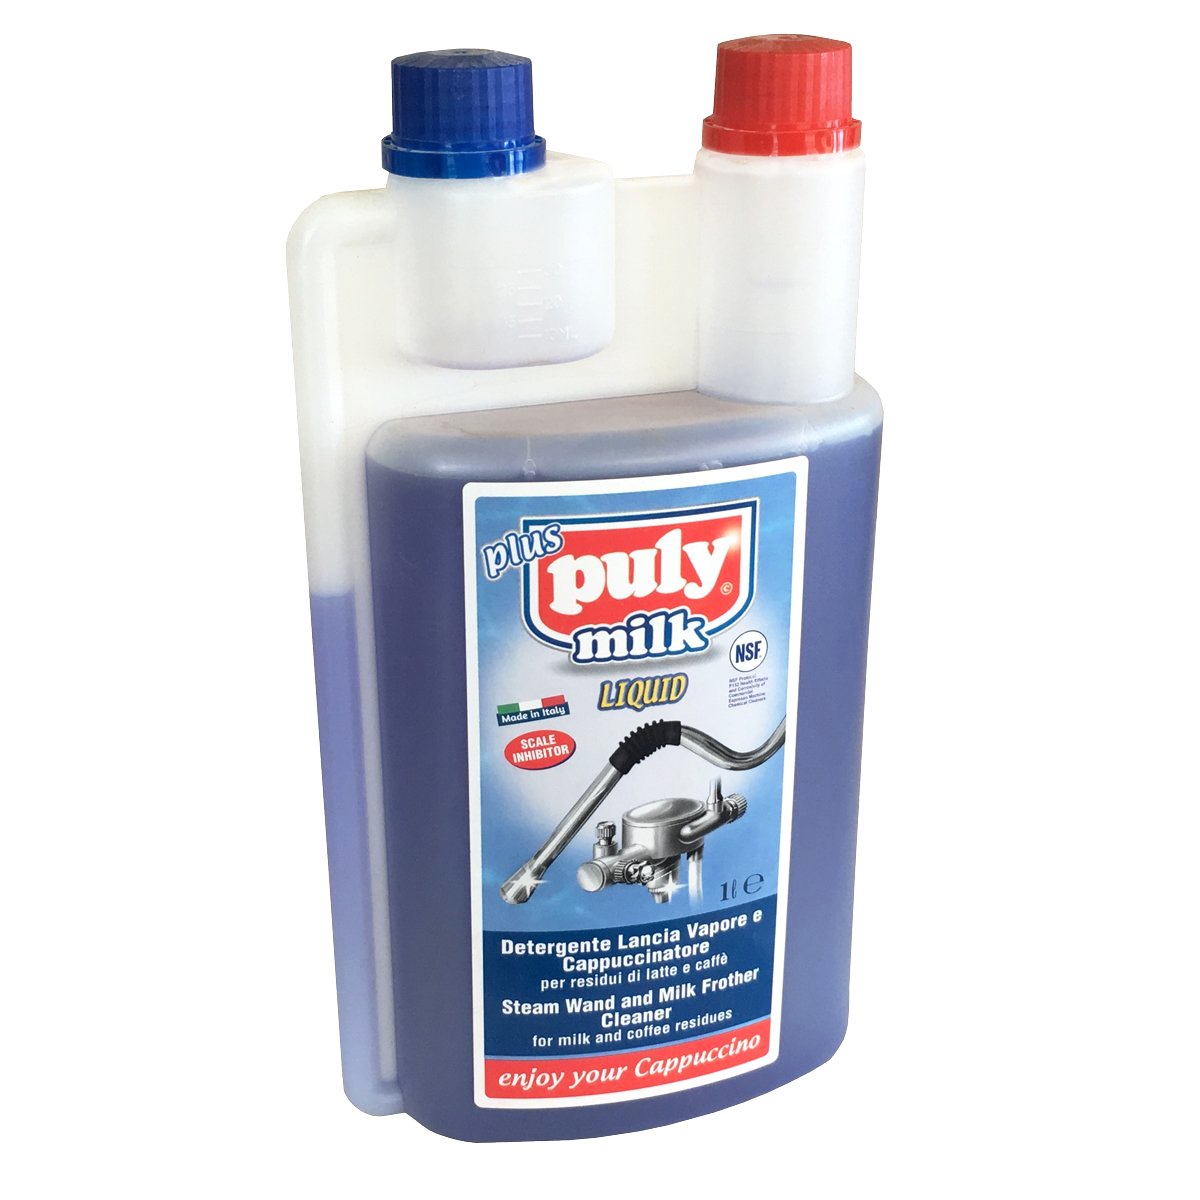 Puly Milk Liquid for Steam Wand Cleaning - Caffèlab